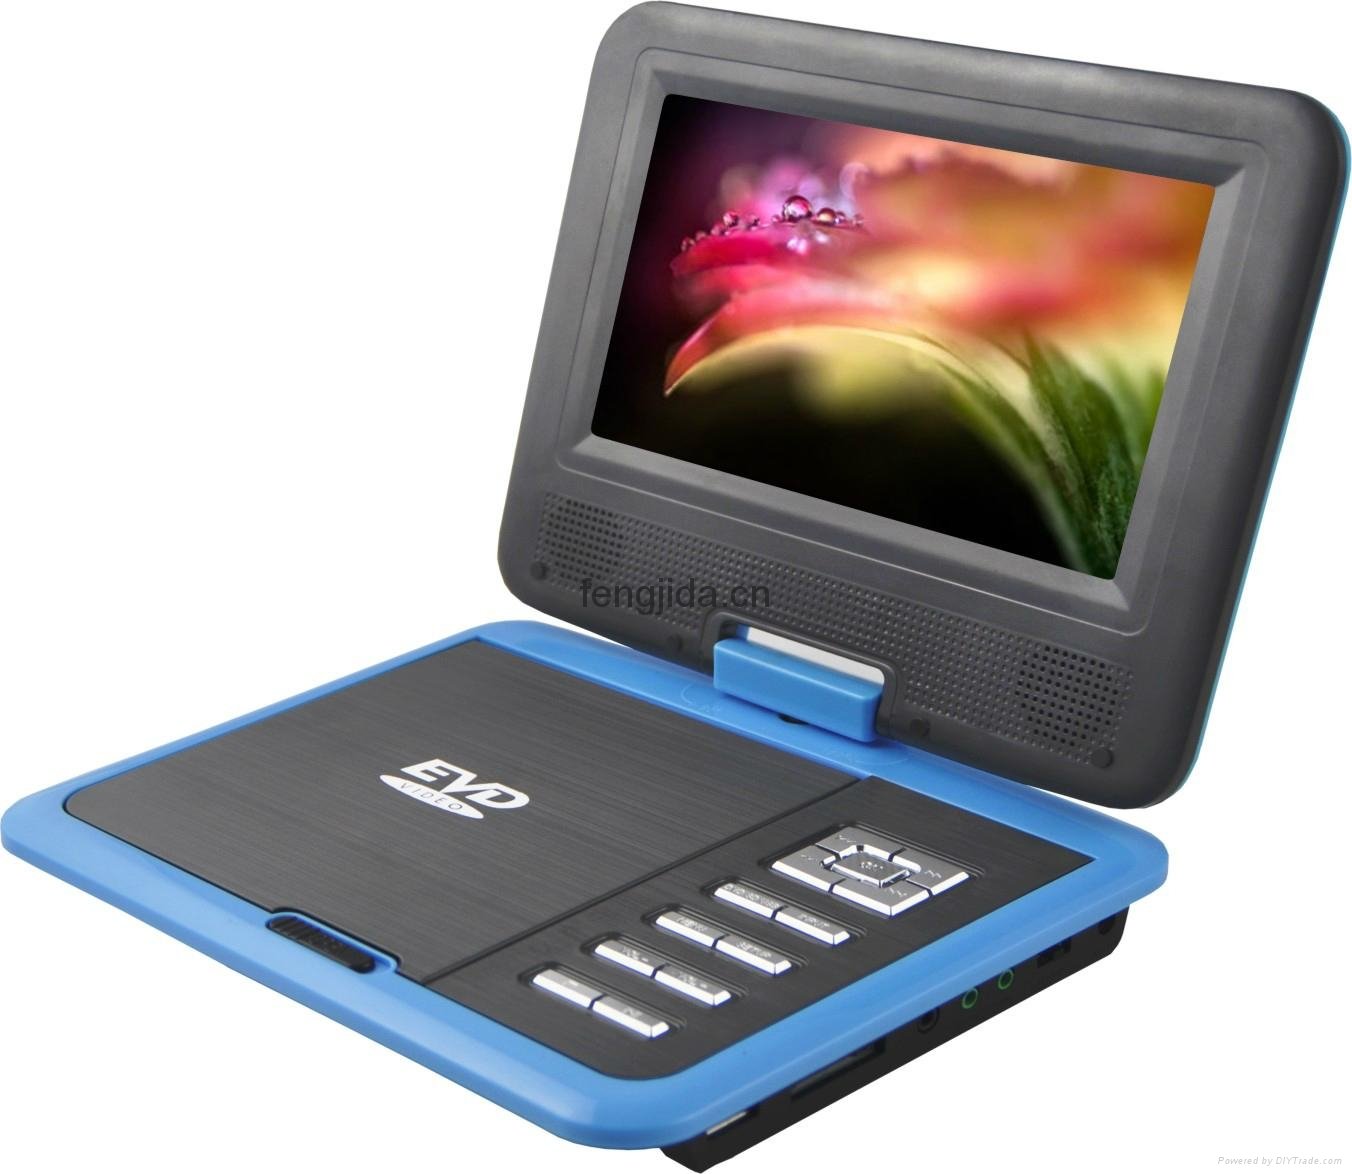 7 Inch Portable DVD Player with tv tuner - 760 - FJD (China ...